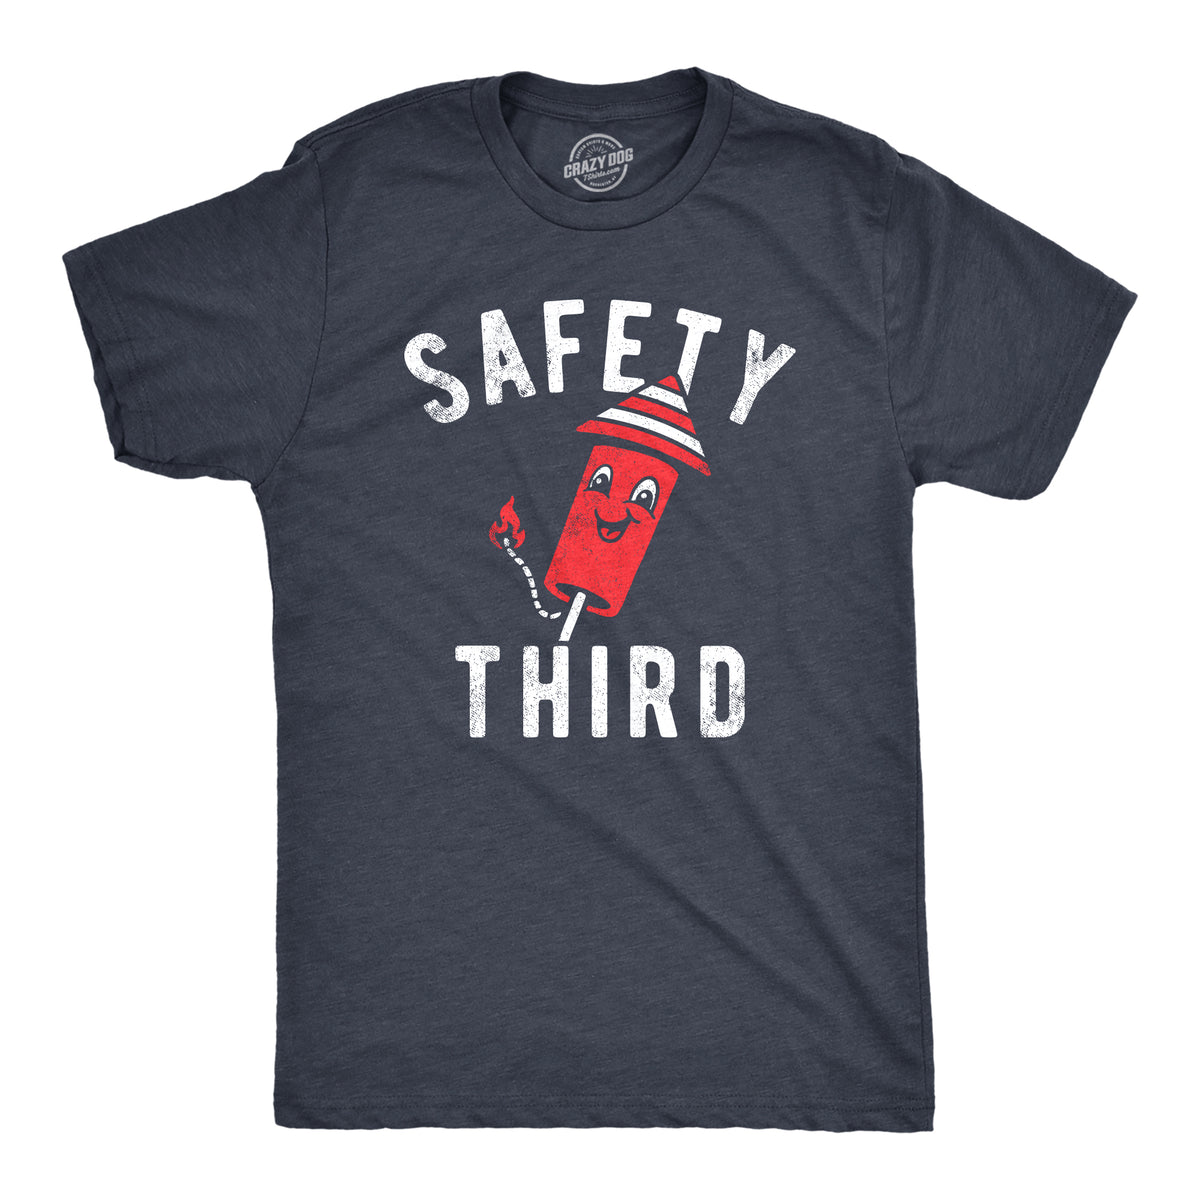 Funny Heather Navy - SAFETY Safety Third Mens T Shirt Nerdy Fourth of July Sarcastic Tee